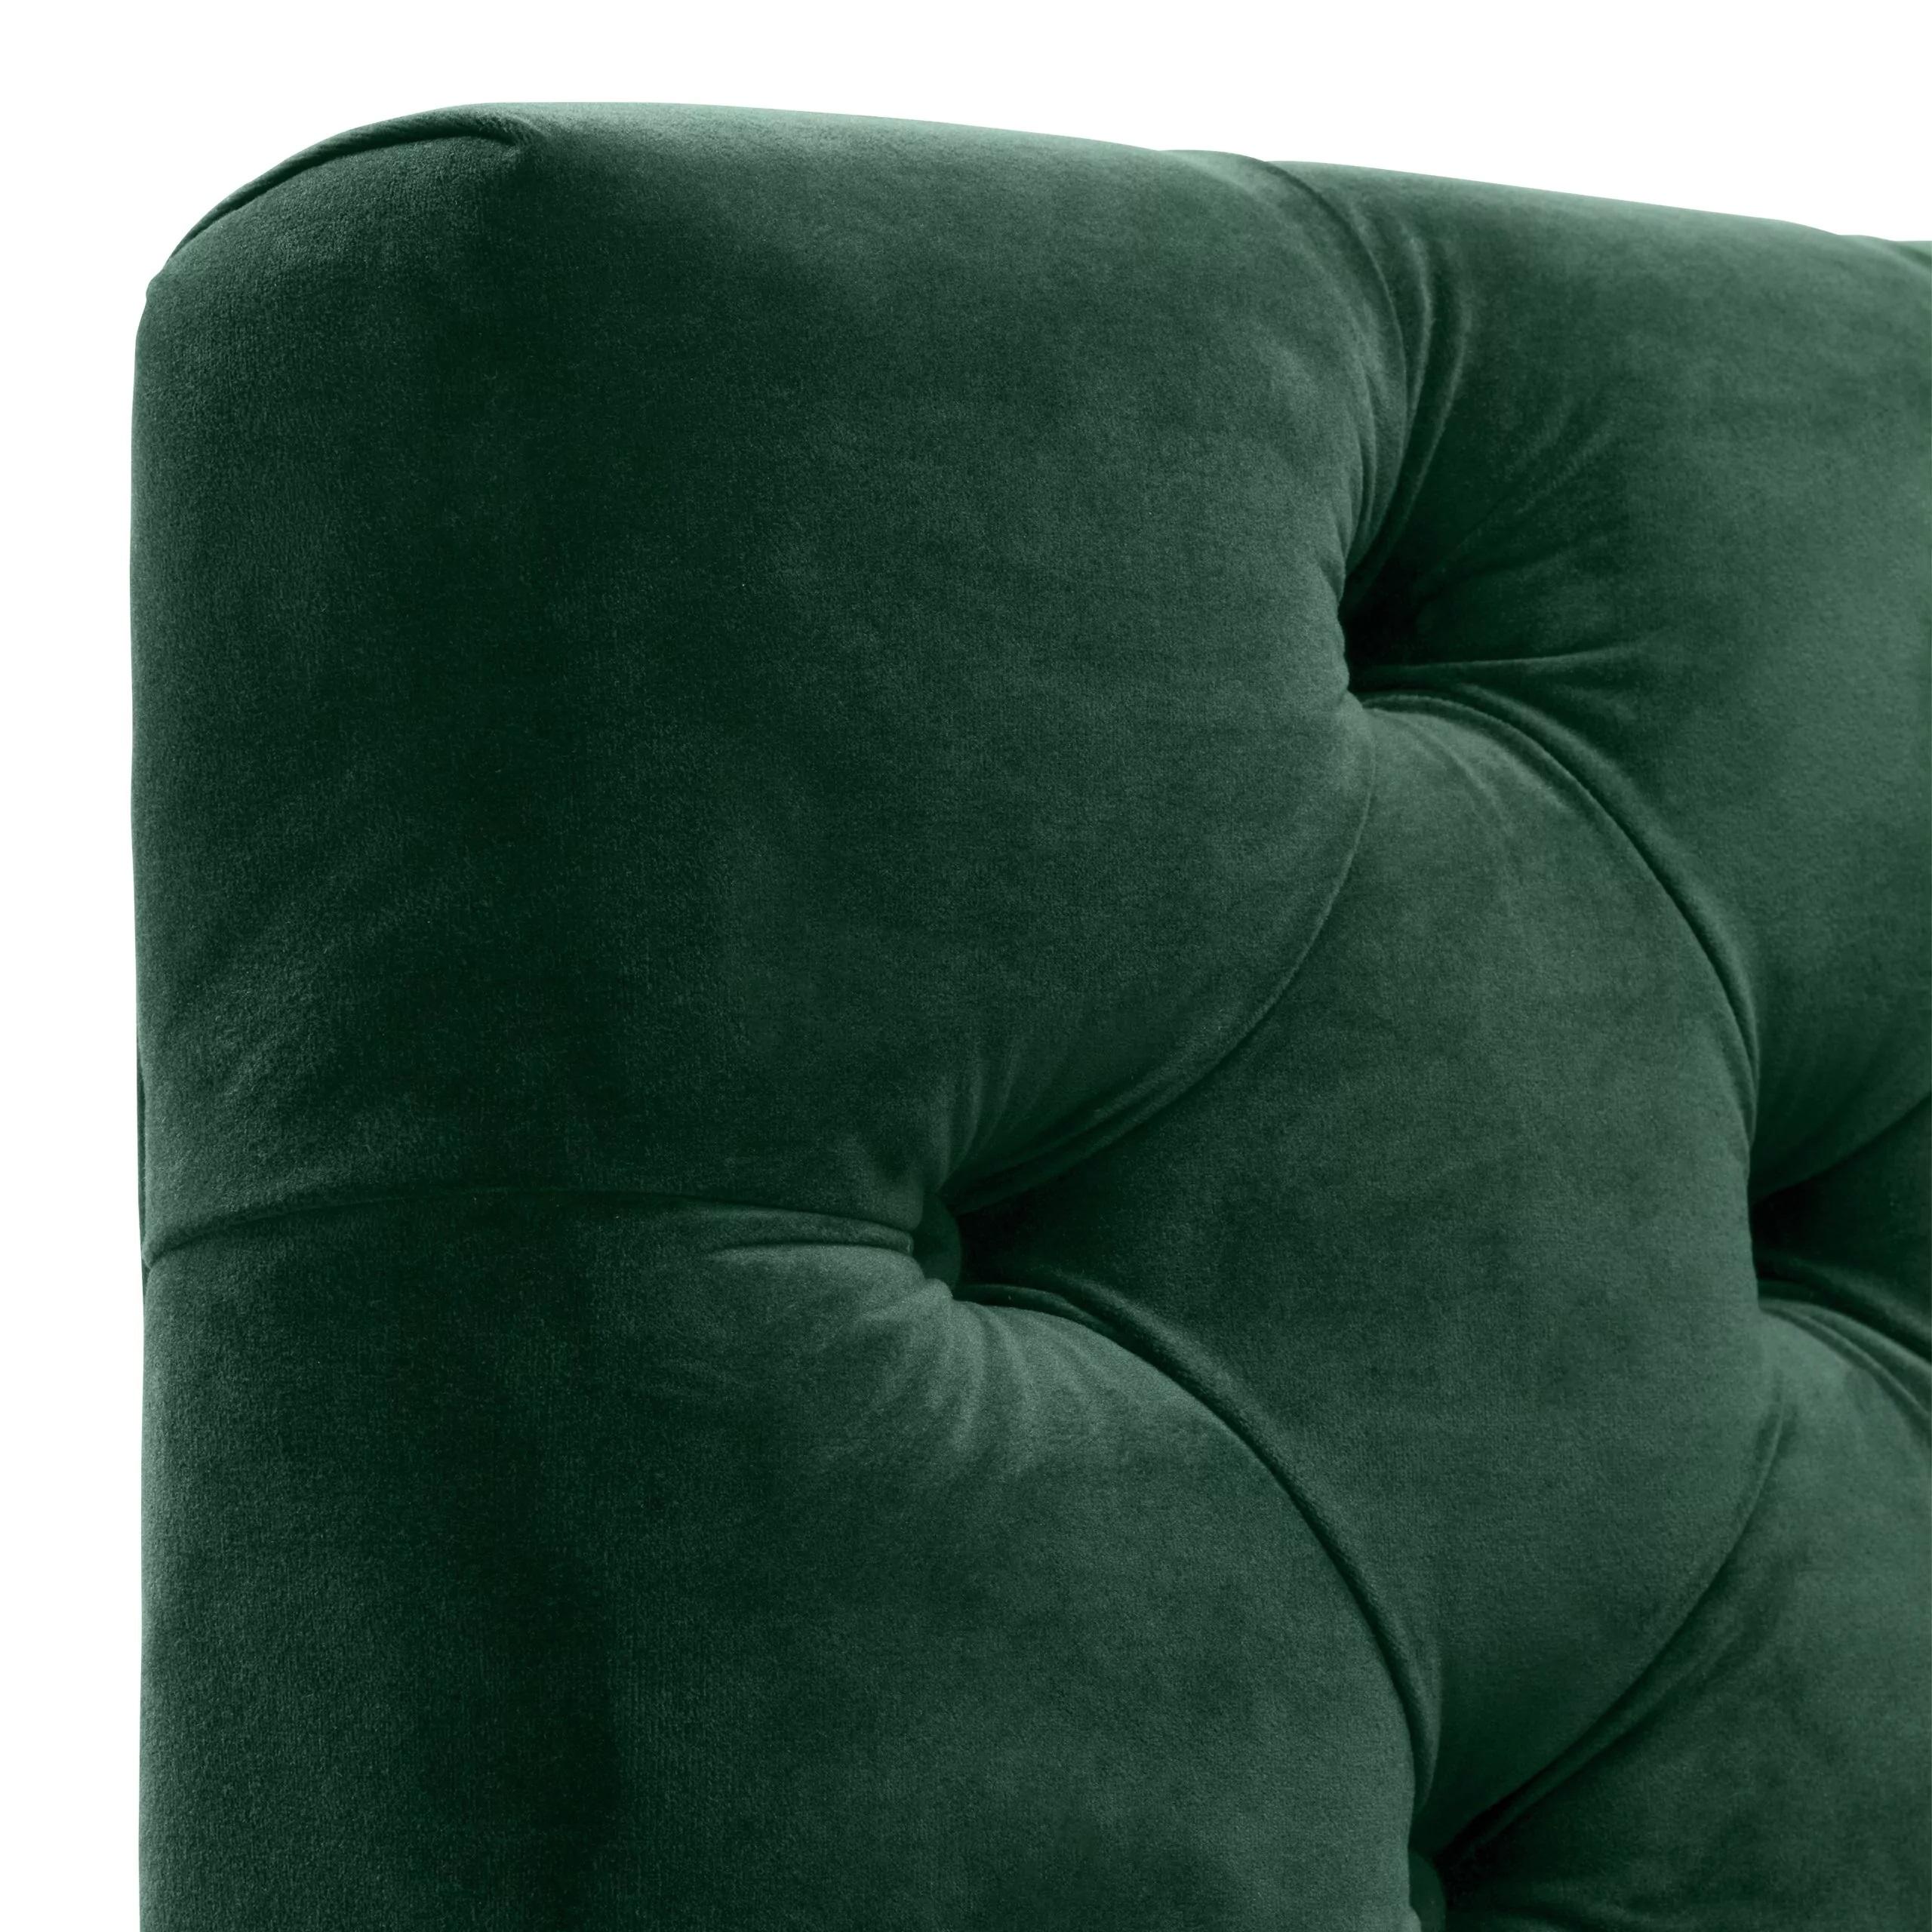 Fabric Green Velvet and Black Wooden Feet with Brass Finishes Chesterfield Style Sofa For Sale